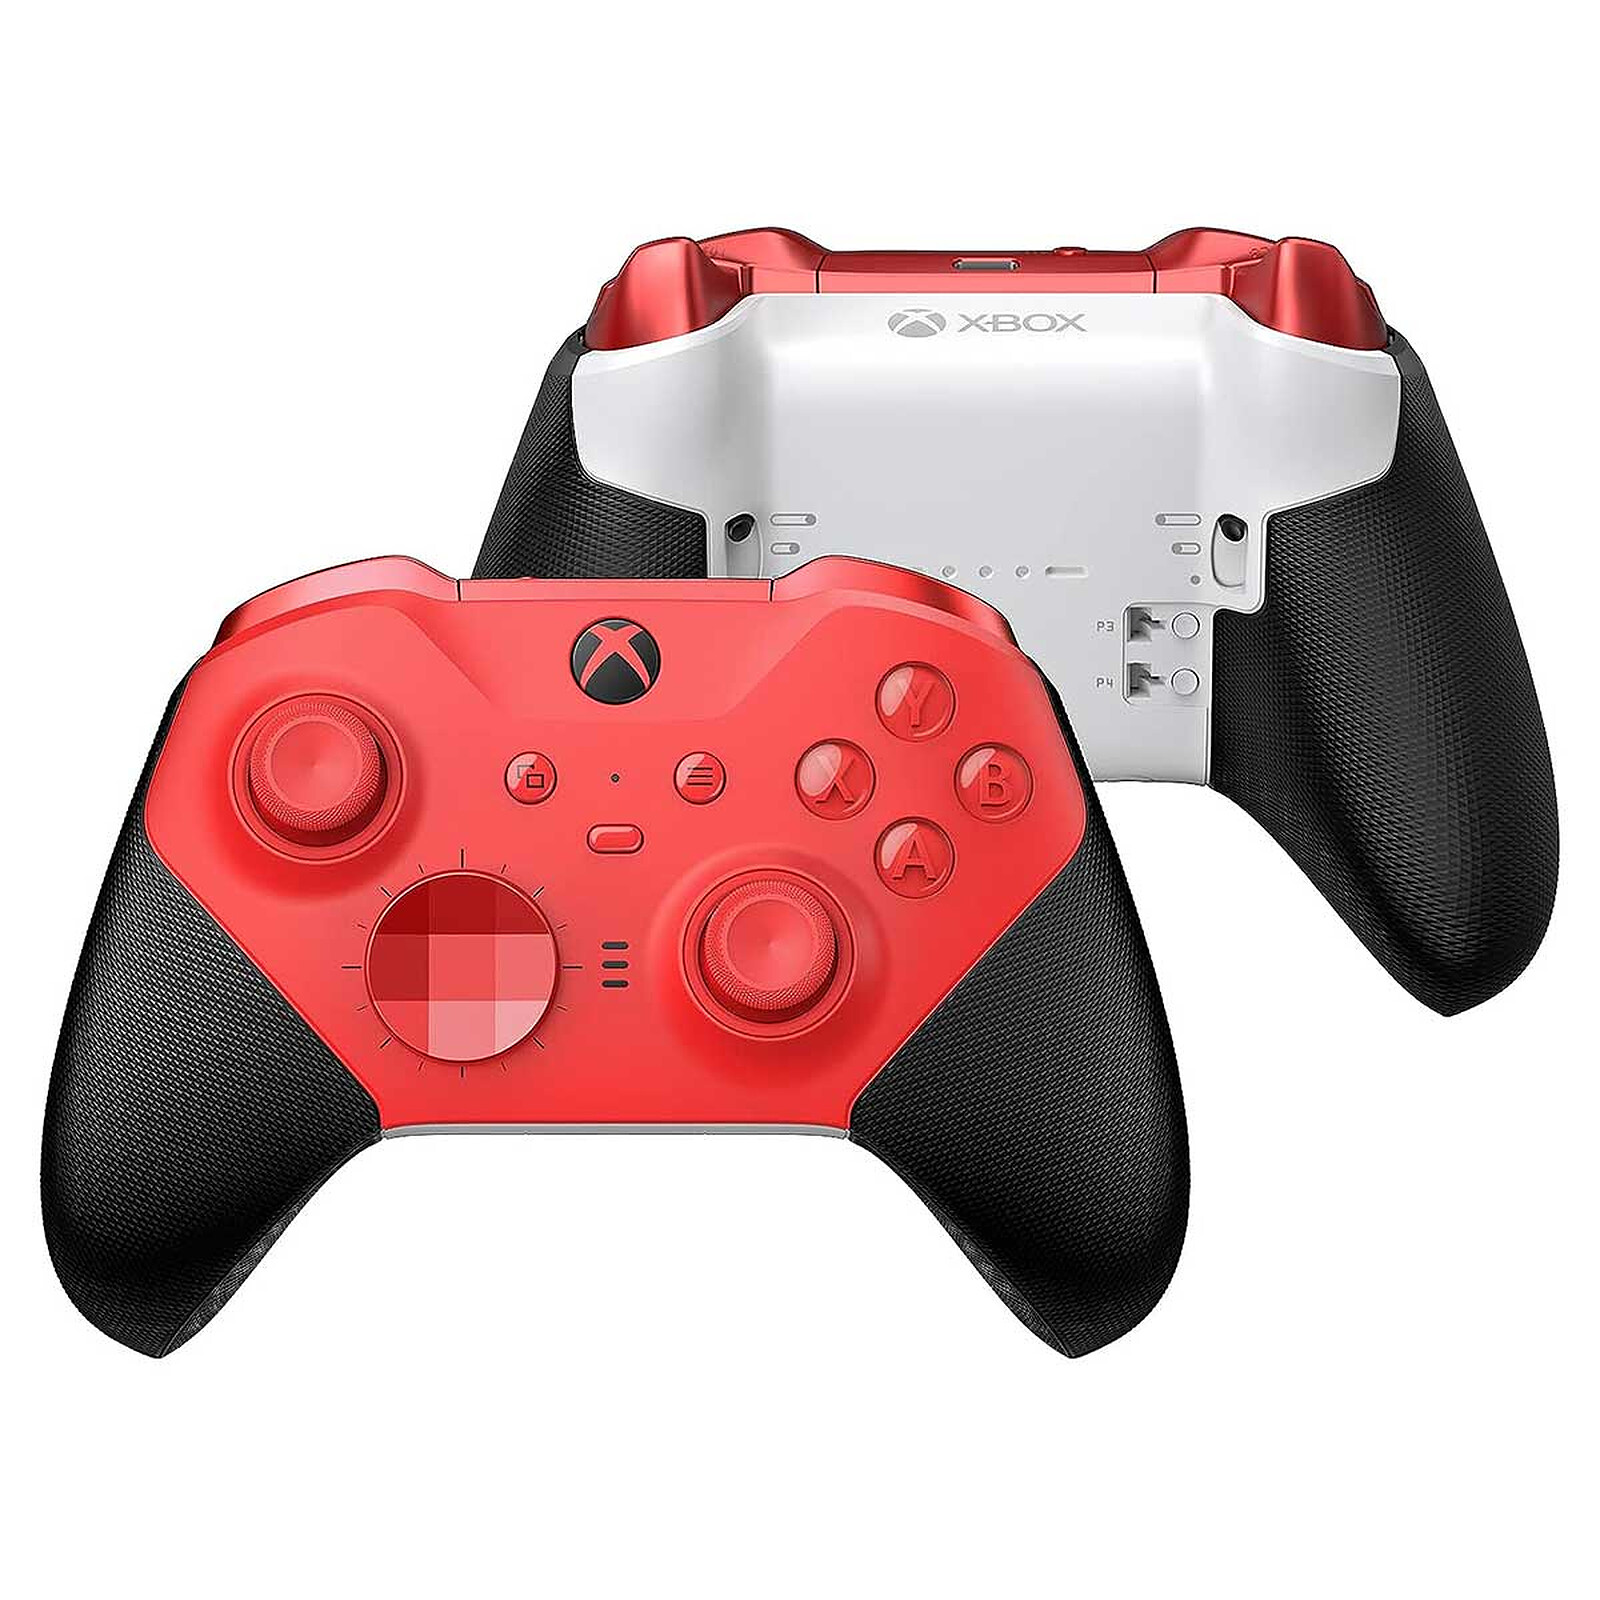 Microsoft Xbox Elite Series 2 Core (Red) - PC game controller - LDLC 3-year  warranty